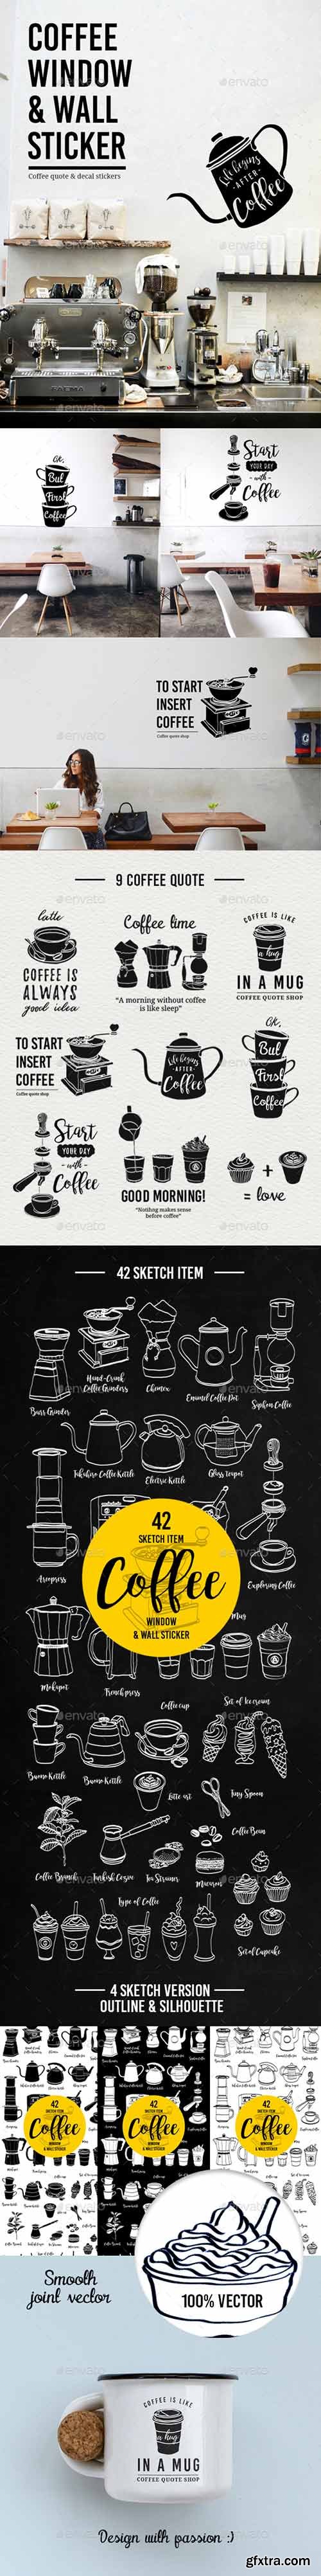 Graphicriver - Coffee Window and Wall Stickers 20159950